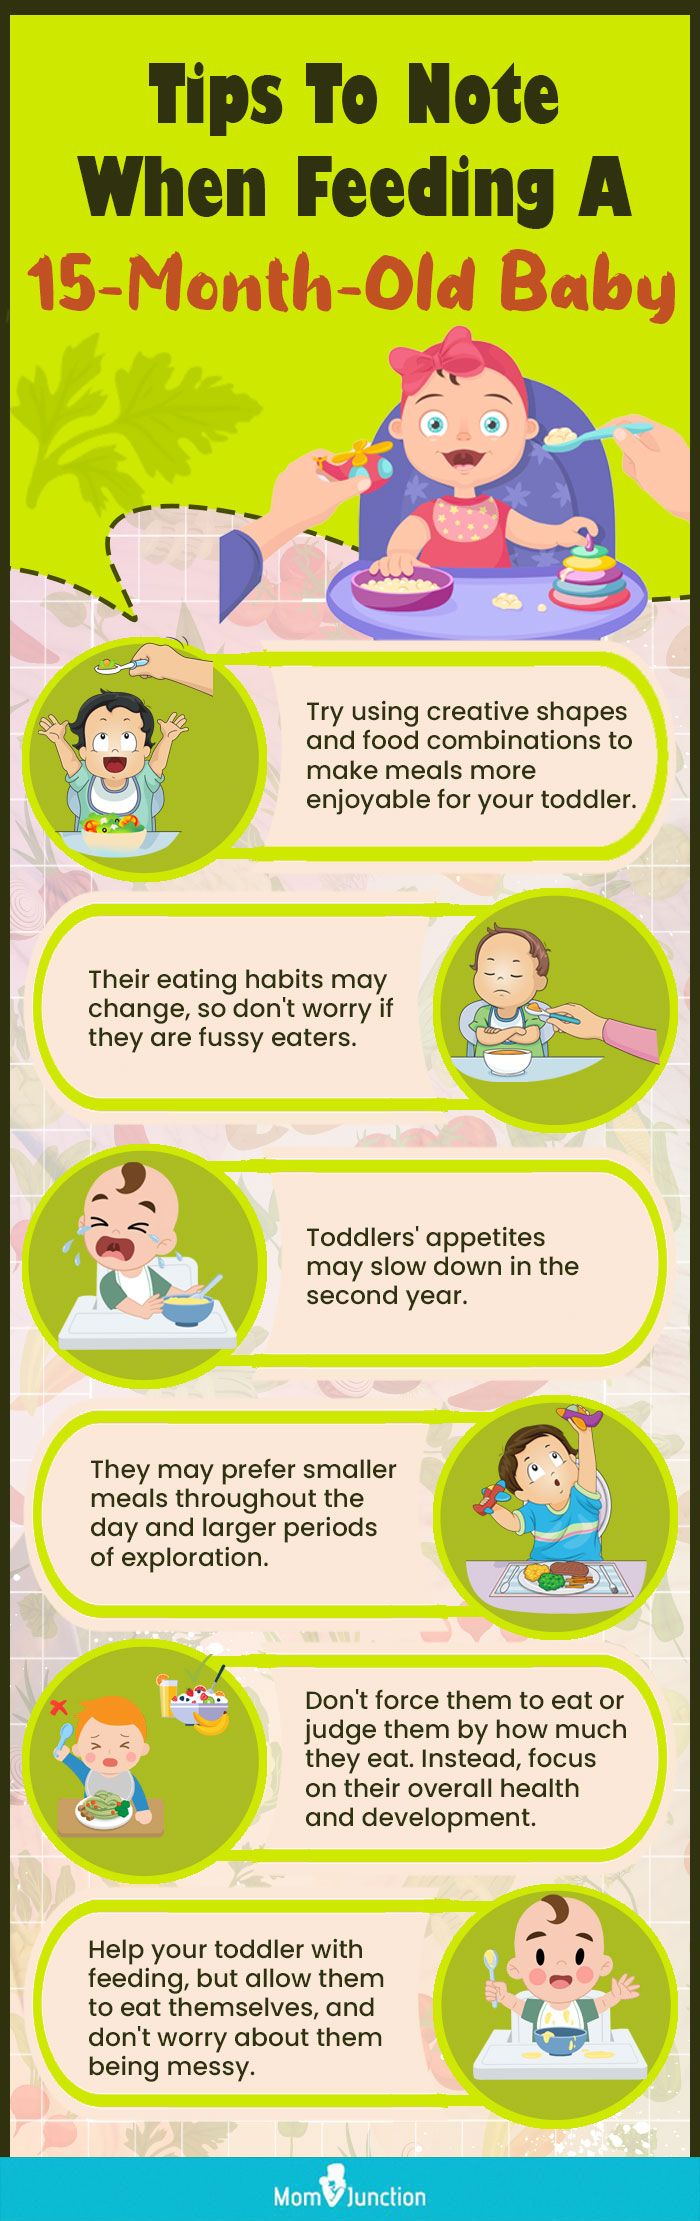 tips to note when feeding a 15 month old baby [infographic]